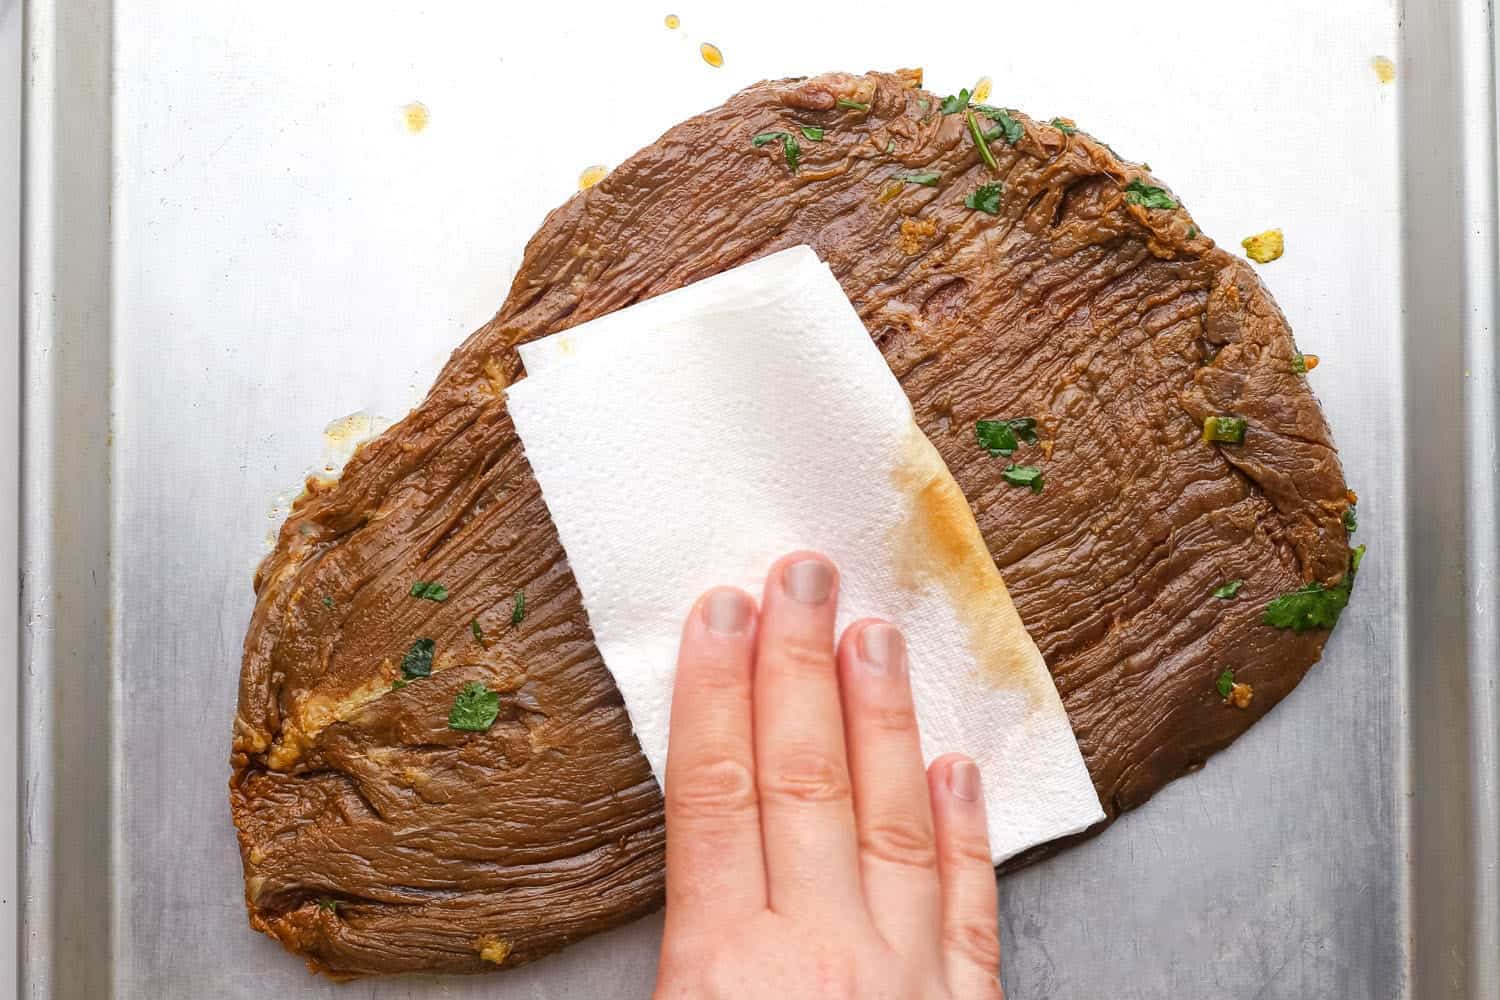 A marinated flank steak on a tray. a hand is drying the meat with a paper towel